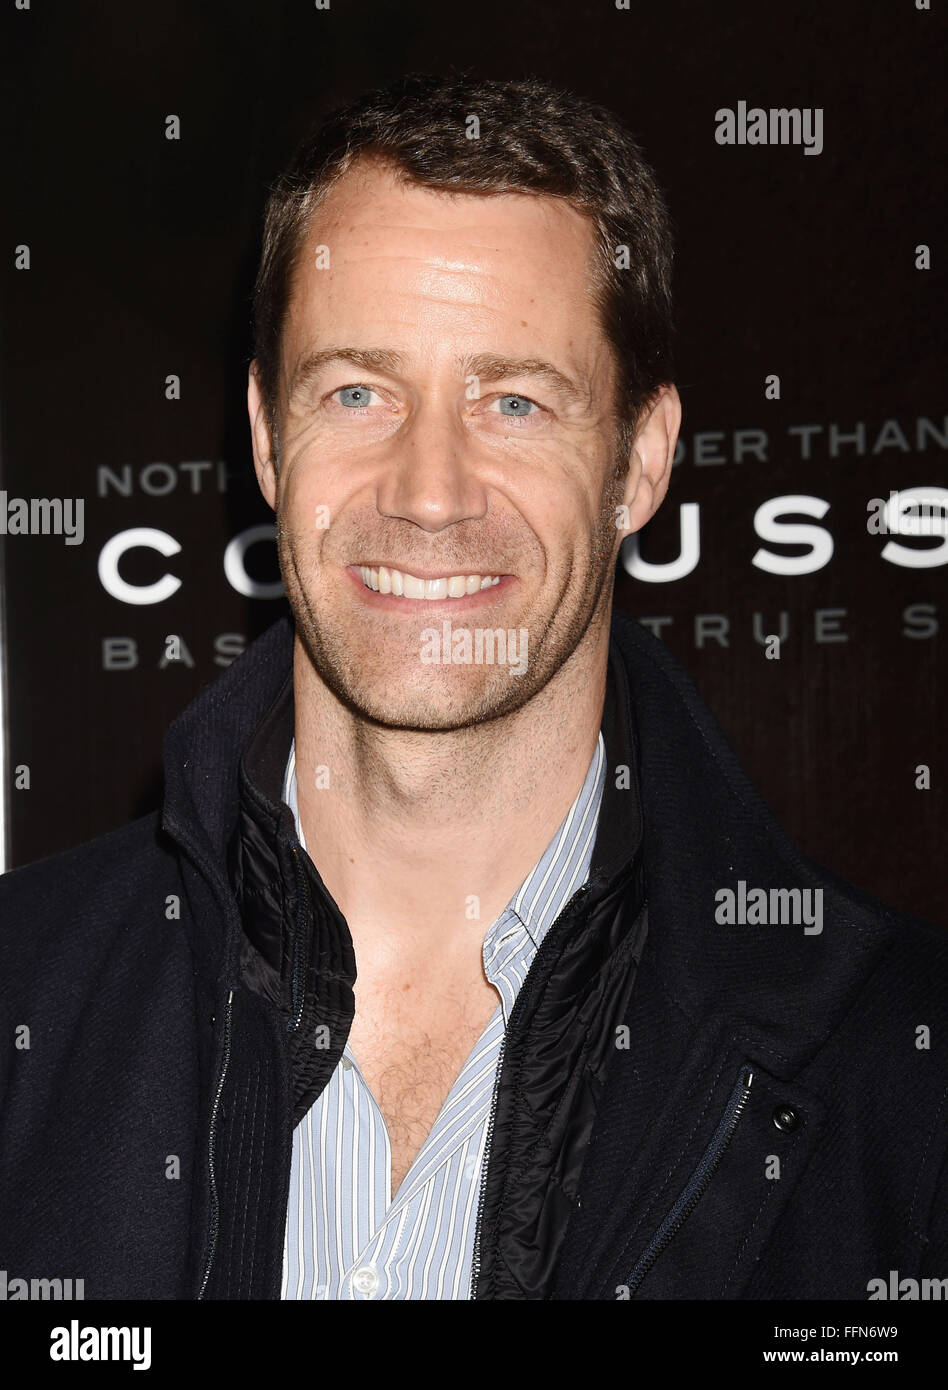 Actor Colin Ferguson attends the screening of Columbia Pictures' 'Concussion' at the Regency Village Theater on November 23, 2015 in Westwood, California., Stock Photo